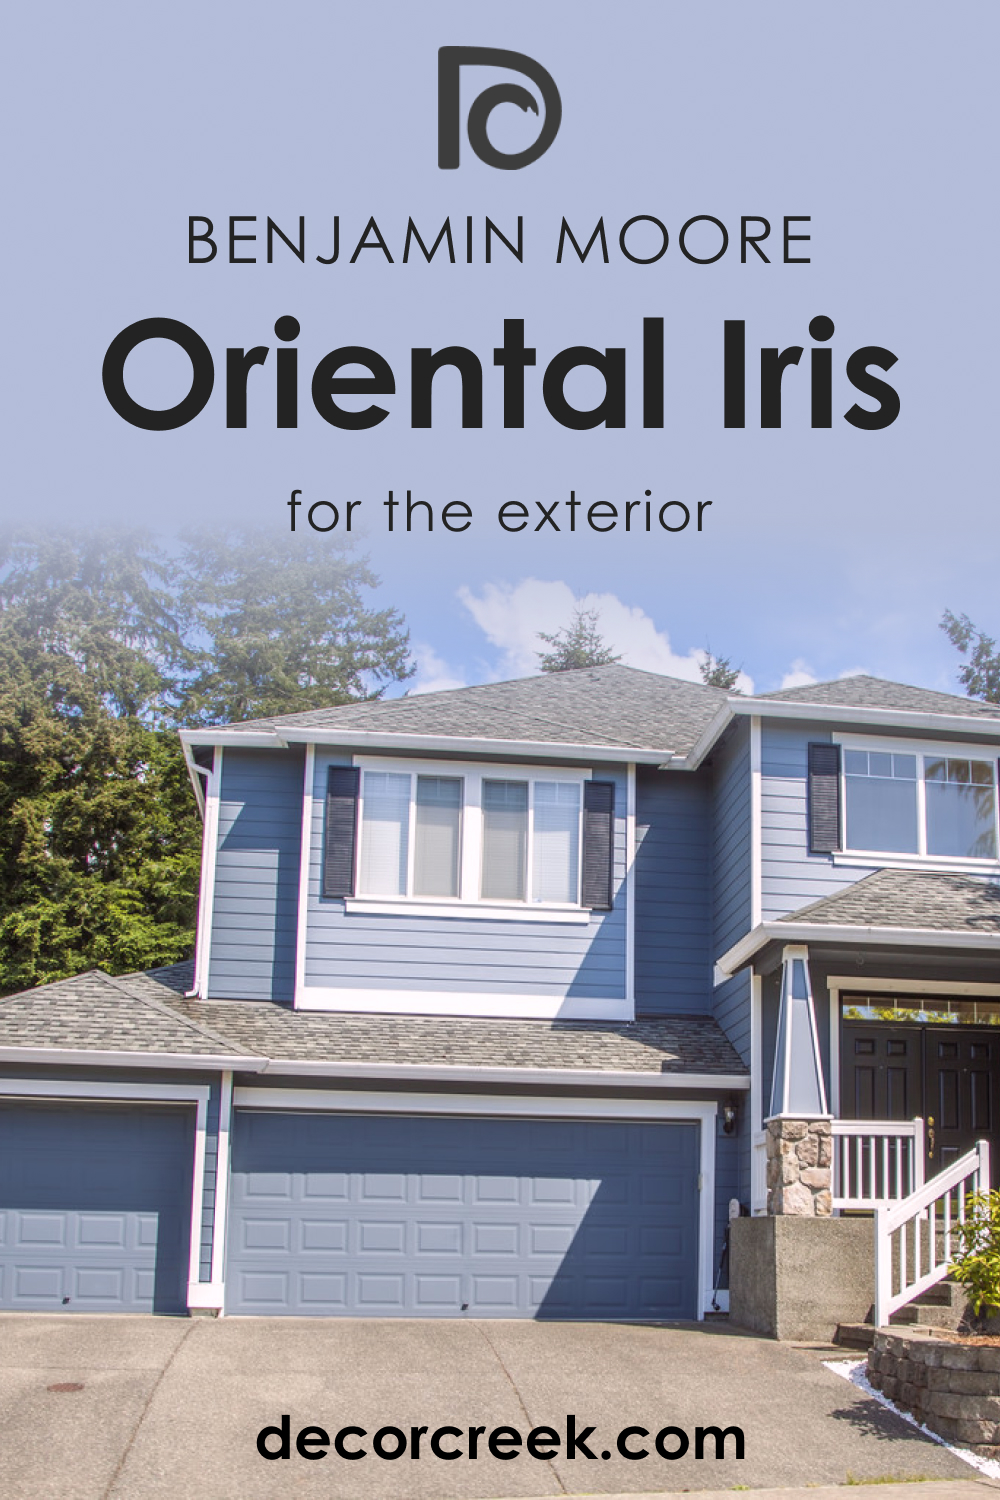 How to Use Oriental Iris 1418 for an Exterior?